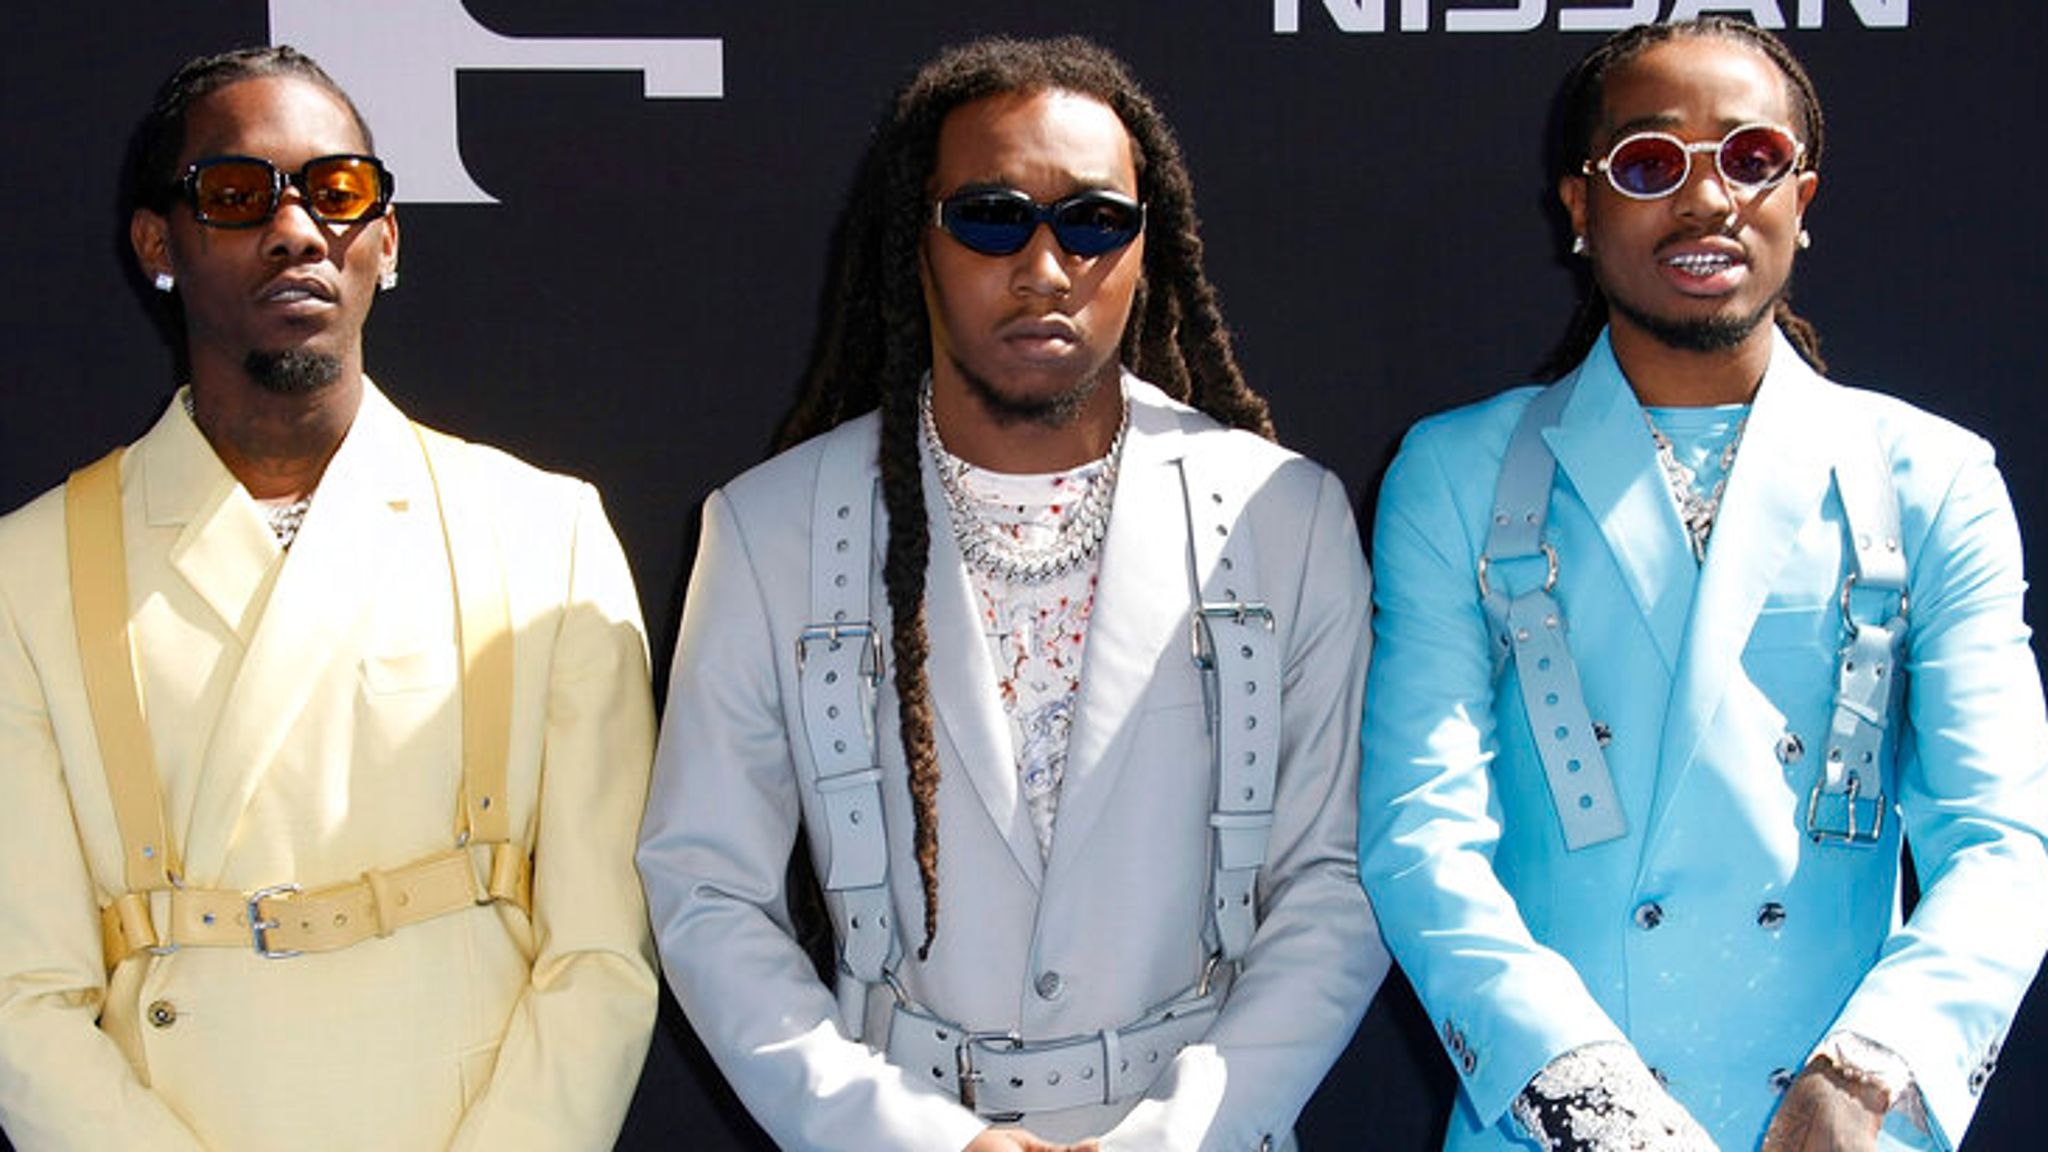 Takeoff tribute: Migos rapper Offset breaks silence on cousin and